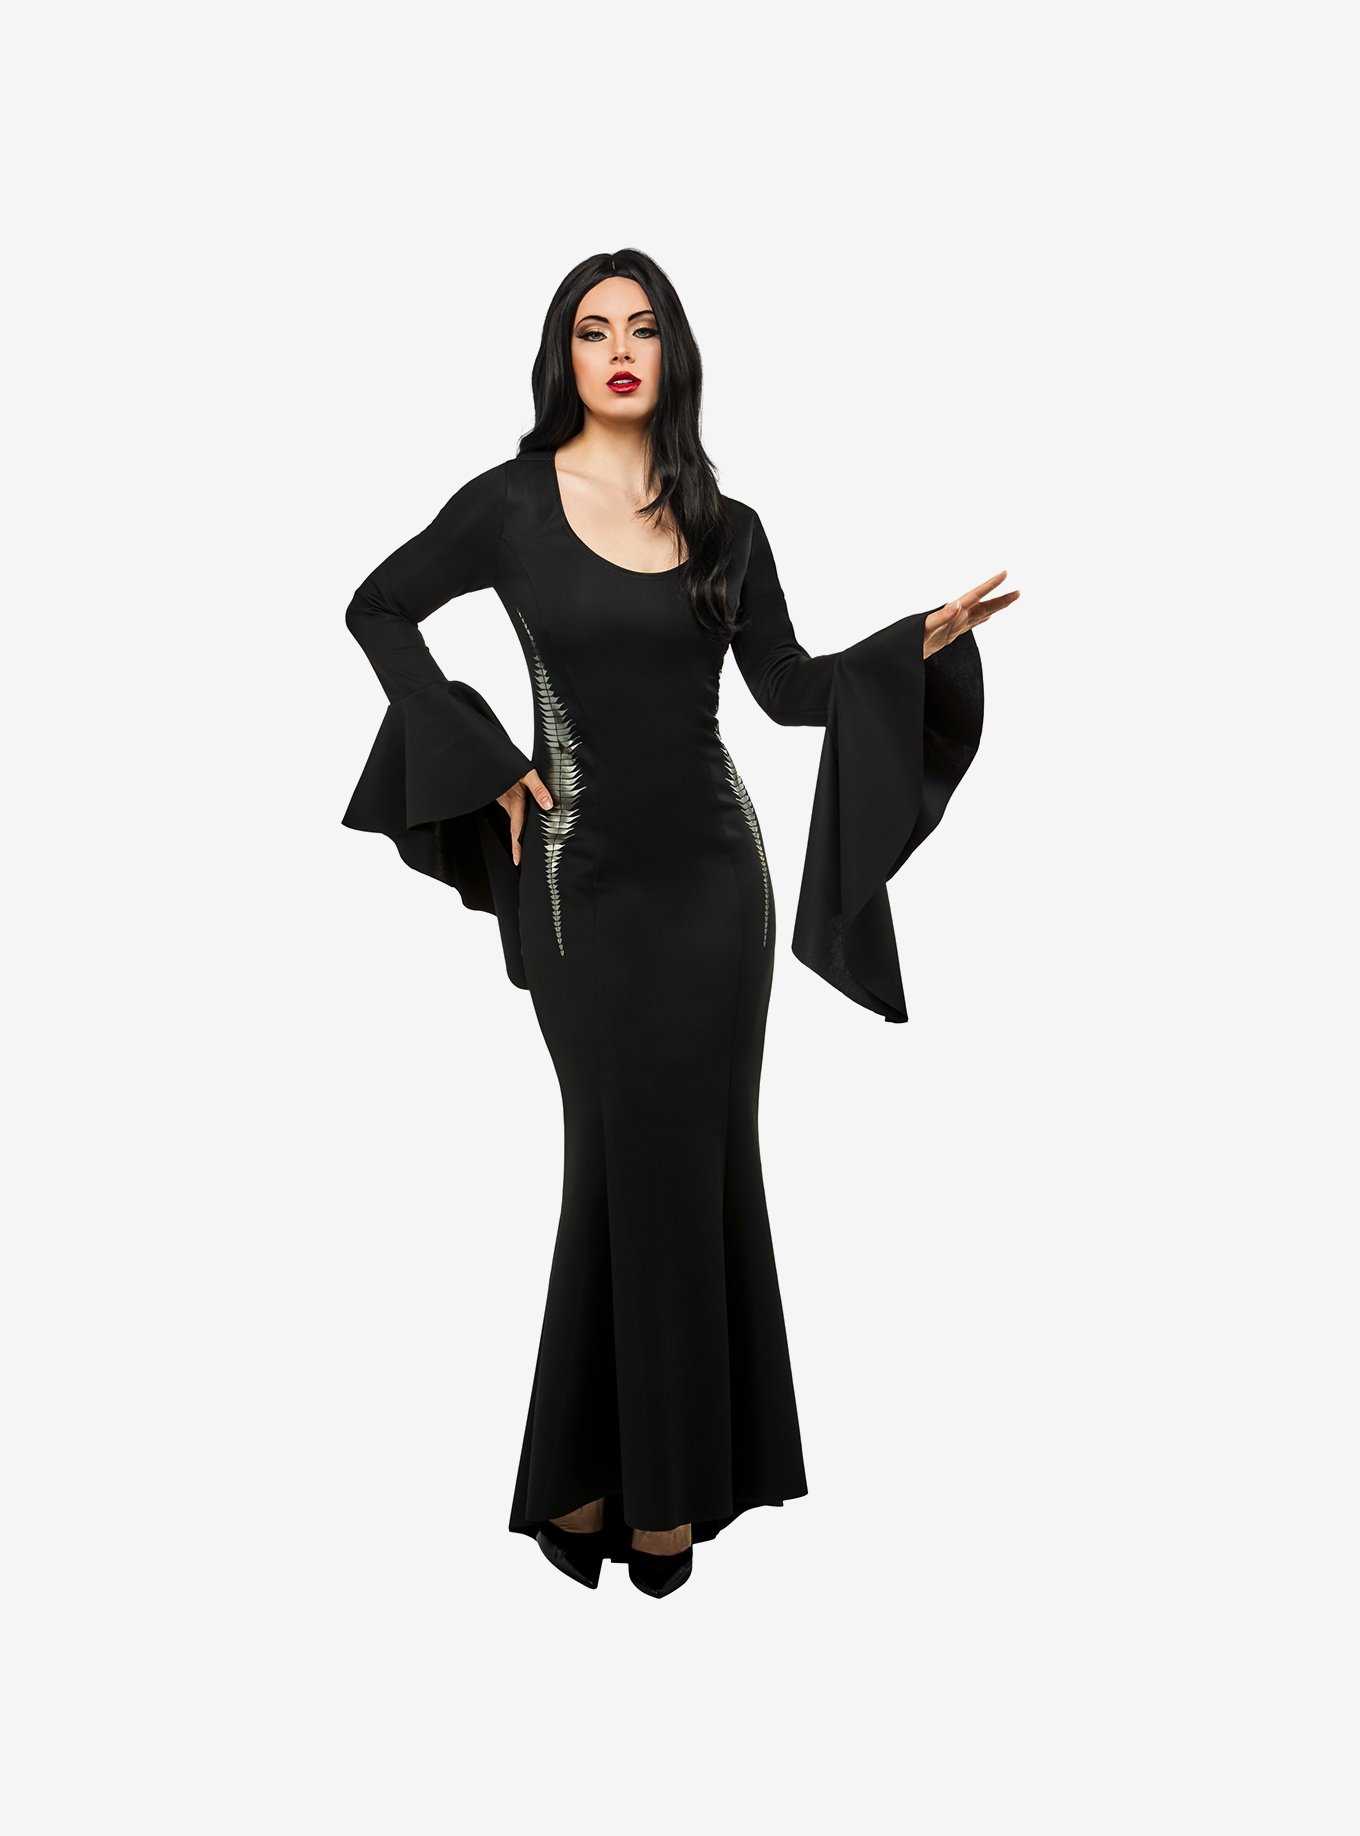 Wednesday Morticia Addams Adult Costume, , hi-res